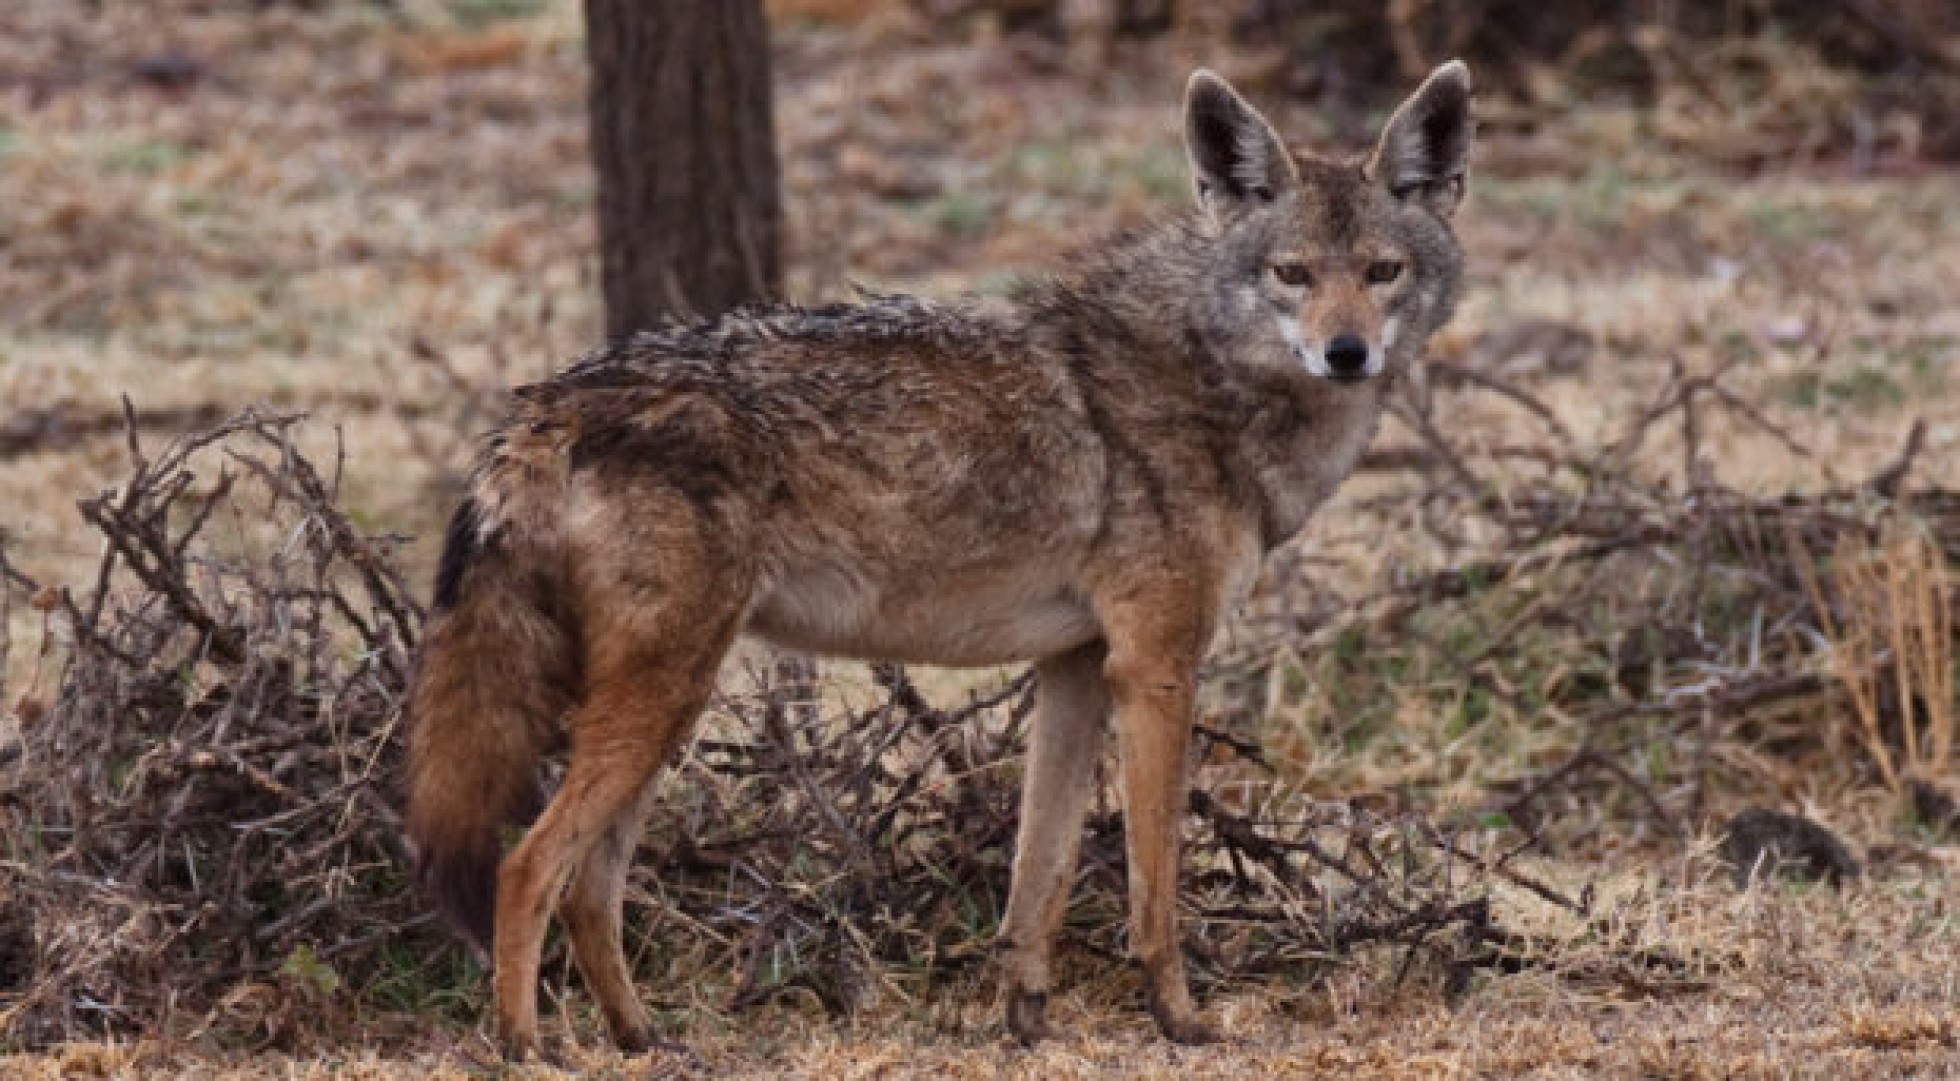 African Wolf : Although only formerly identified by mondern science in 2017, Aristotle recognized the African wolf in his time